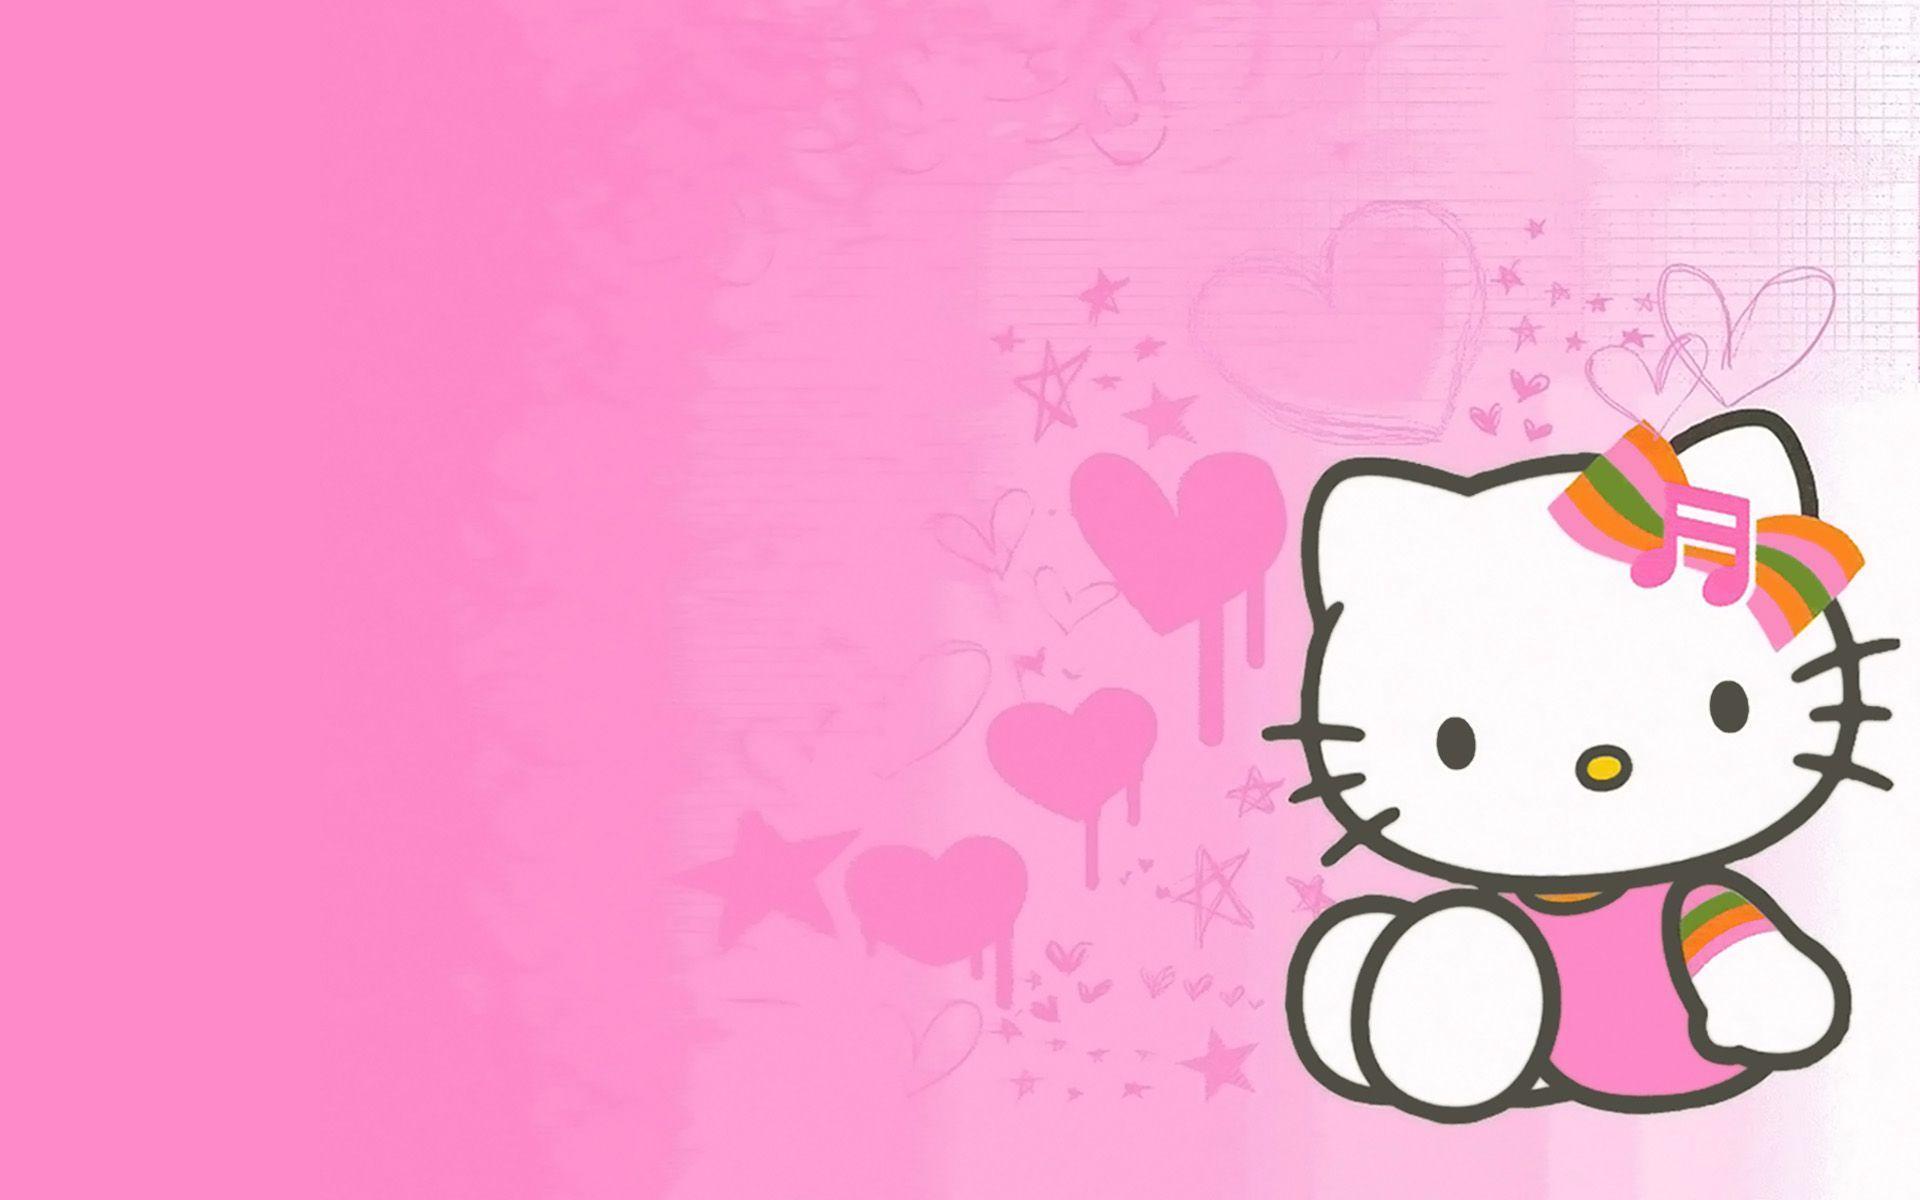 Wallpaper Backgrounds Hello Kitty